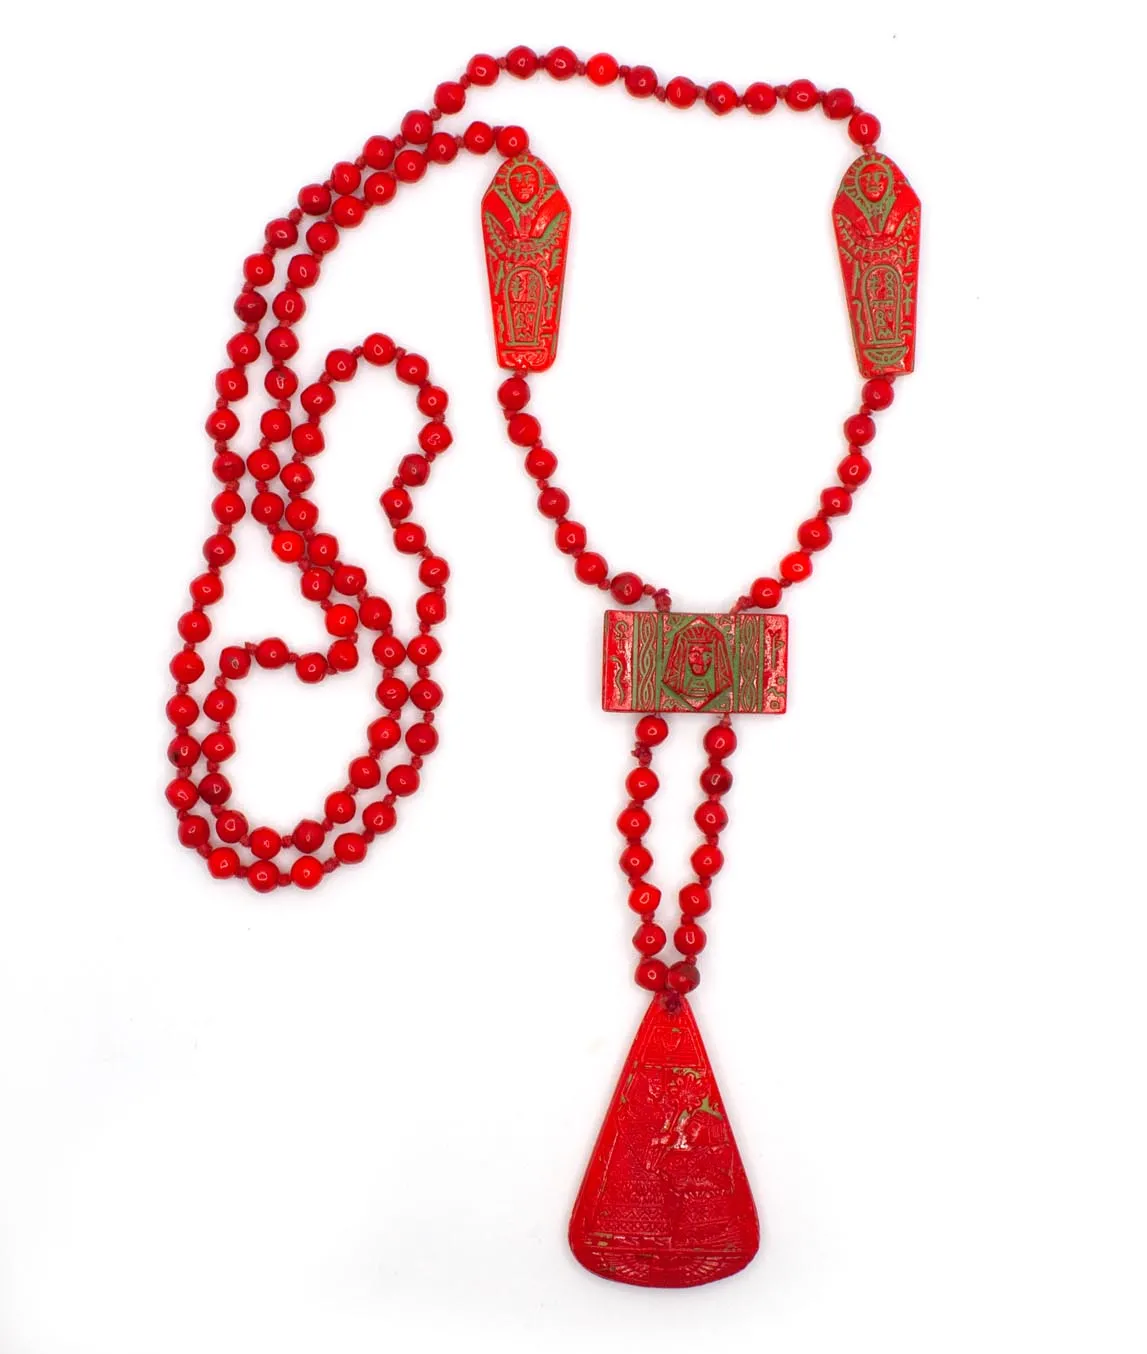 Neiger Brothers red bead Egyptian Revival Art Deco necklace with pendant on white background